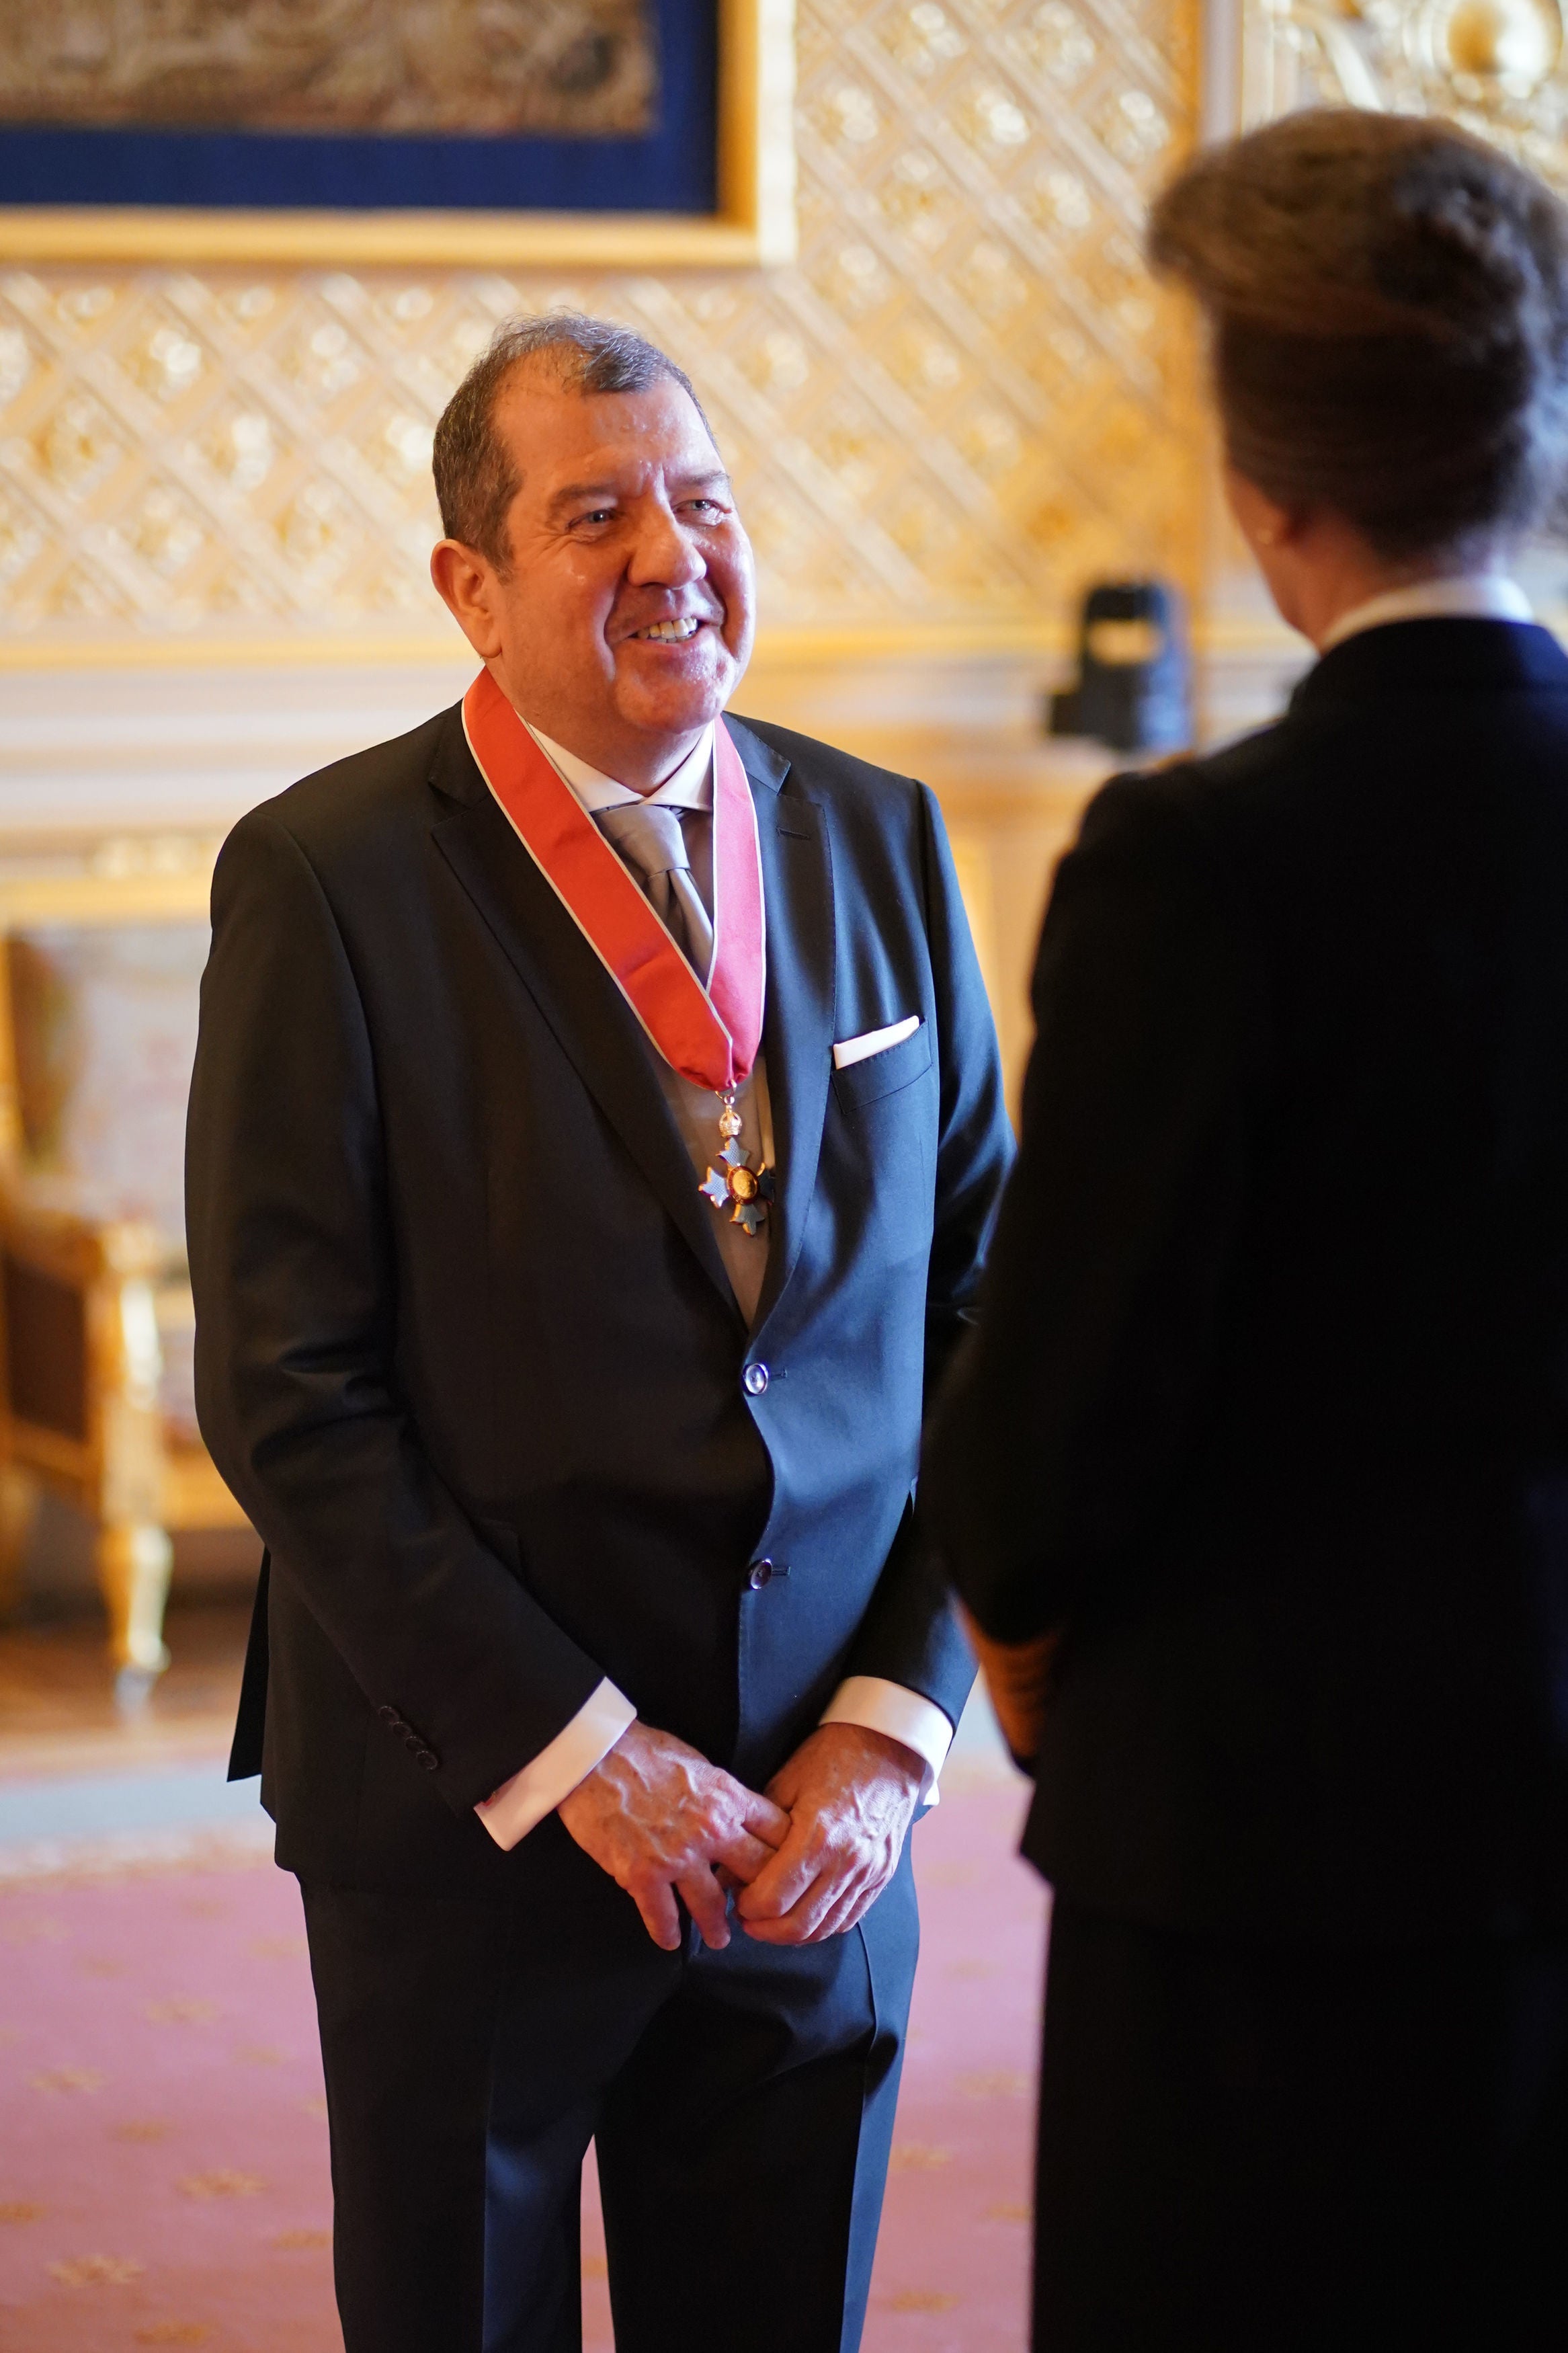 Ivor Bolton, from London, Conductor, is made a Commander of the Order of the British Empire by the Princess Royal at Windsor Castle